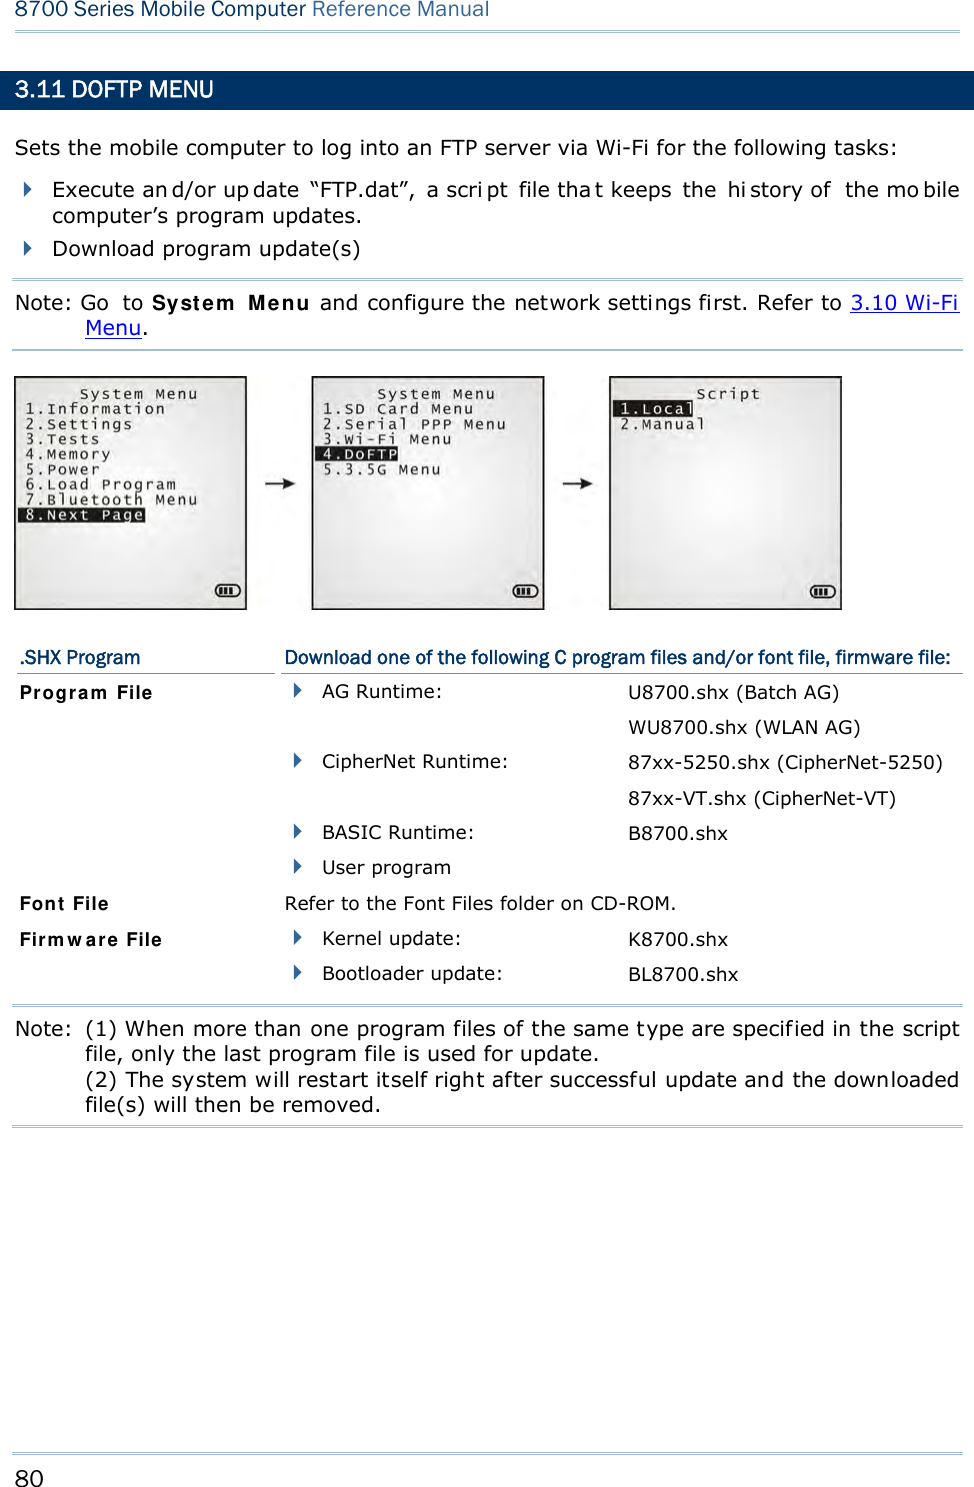 80  8700 Series Mobile Computer Reference Manual  3.11 DOFTP MENU Sets the mobile computer to log into an FTP server via Wi-Fi for the following tasks:  Execute an d/or up date  “FTP.dat”,  a scri pt  file tha t keeps  the  hi story of  the mo bile computer’s program updates.  Download program update(s) Note: Go  to Syst em  M enu and configure the network settings first. Refer to 3.10 Wi-Fi Menu.  .SHX Program  Download one of the following C program files and/or font file, firmware file:  AG Runtime:  U8700.shx (Batch AG) WU8700.shx (WLAN AG)  CipherNet Runtime:  87xx-5250.shx (CipherNet-5250) 87xx-VT.shx (CipherNet-VT)  BASIC Runtime:  B8700.shx Pr ogram  File   User program   Font  File  Refer to the Font Files folder on CD-ROM.  Kernel update:  K8700.shx Fir m w ar e  File  Bootloader update:  BL8700.shx Note:  (1) When more than one program files of the same type are specified in the script file, only the last program file is used for update. (2) The system will restart itself right after successful update and the downloaded file(s) will then be removed.    